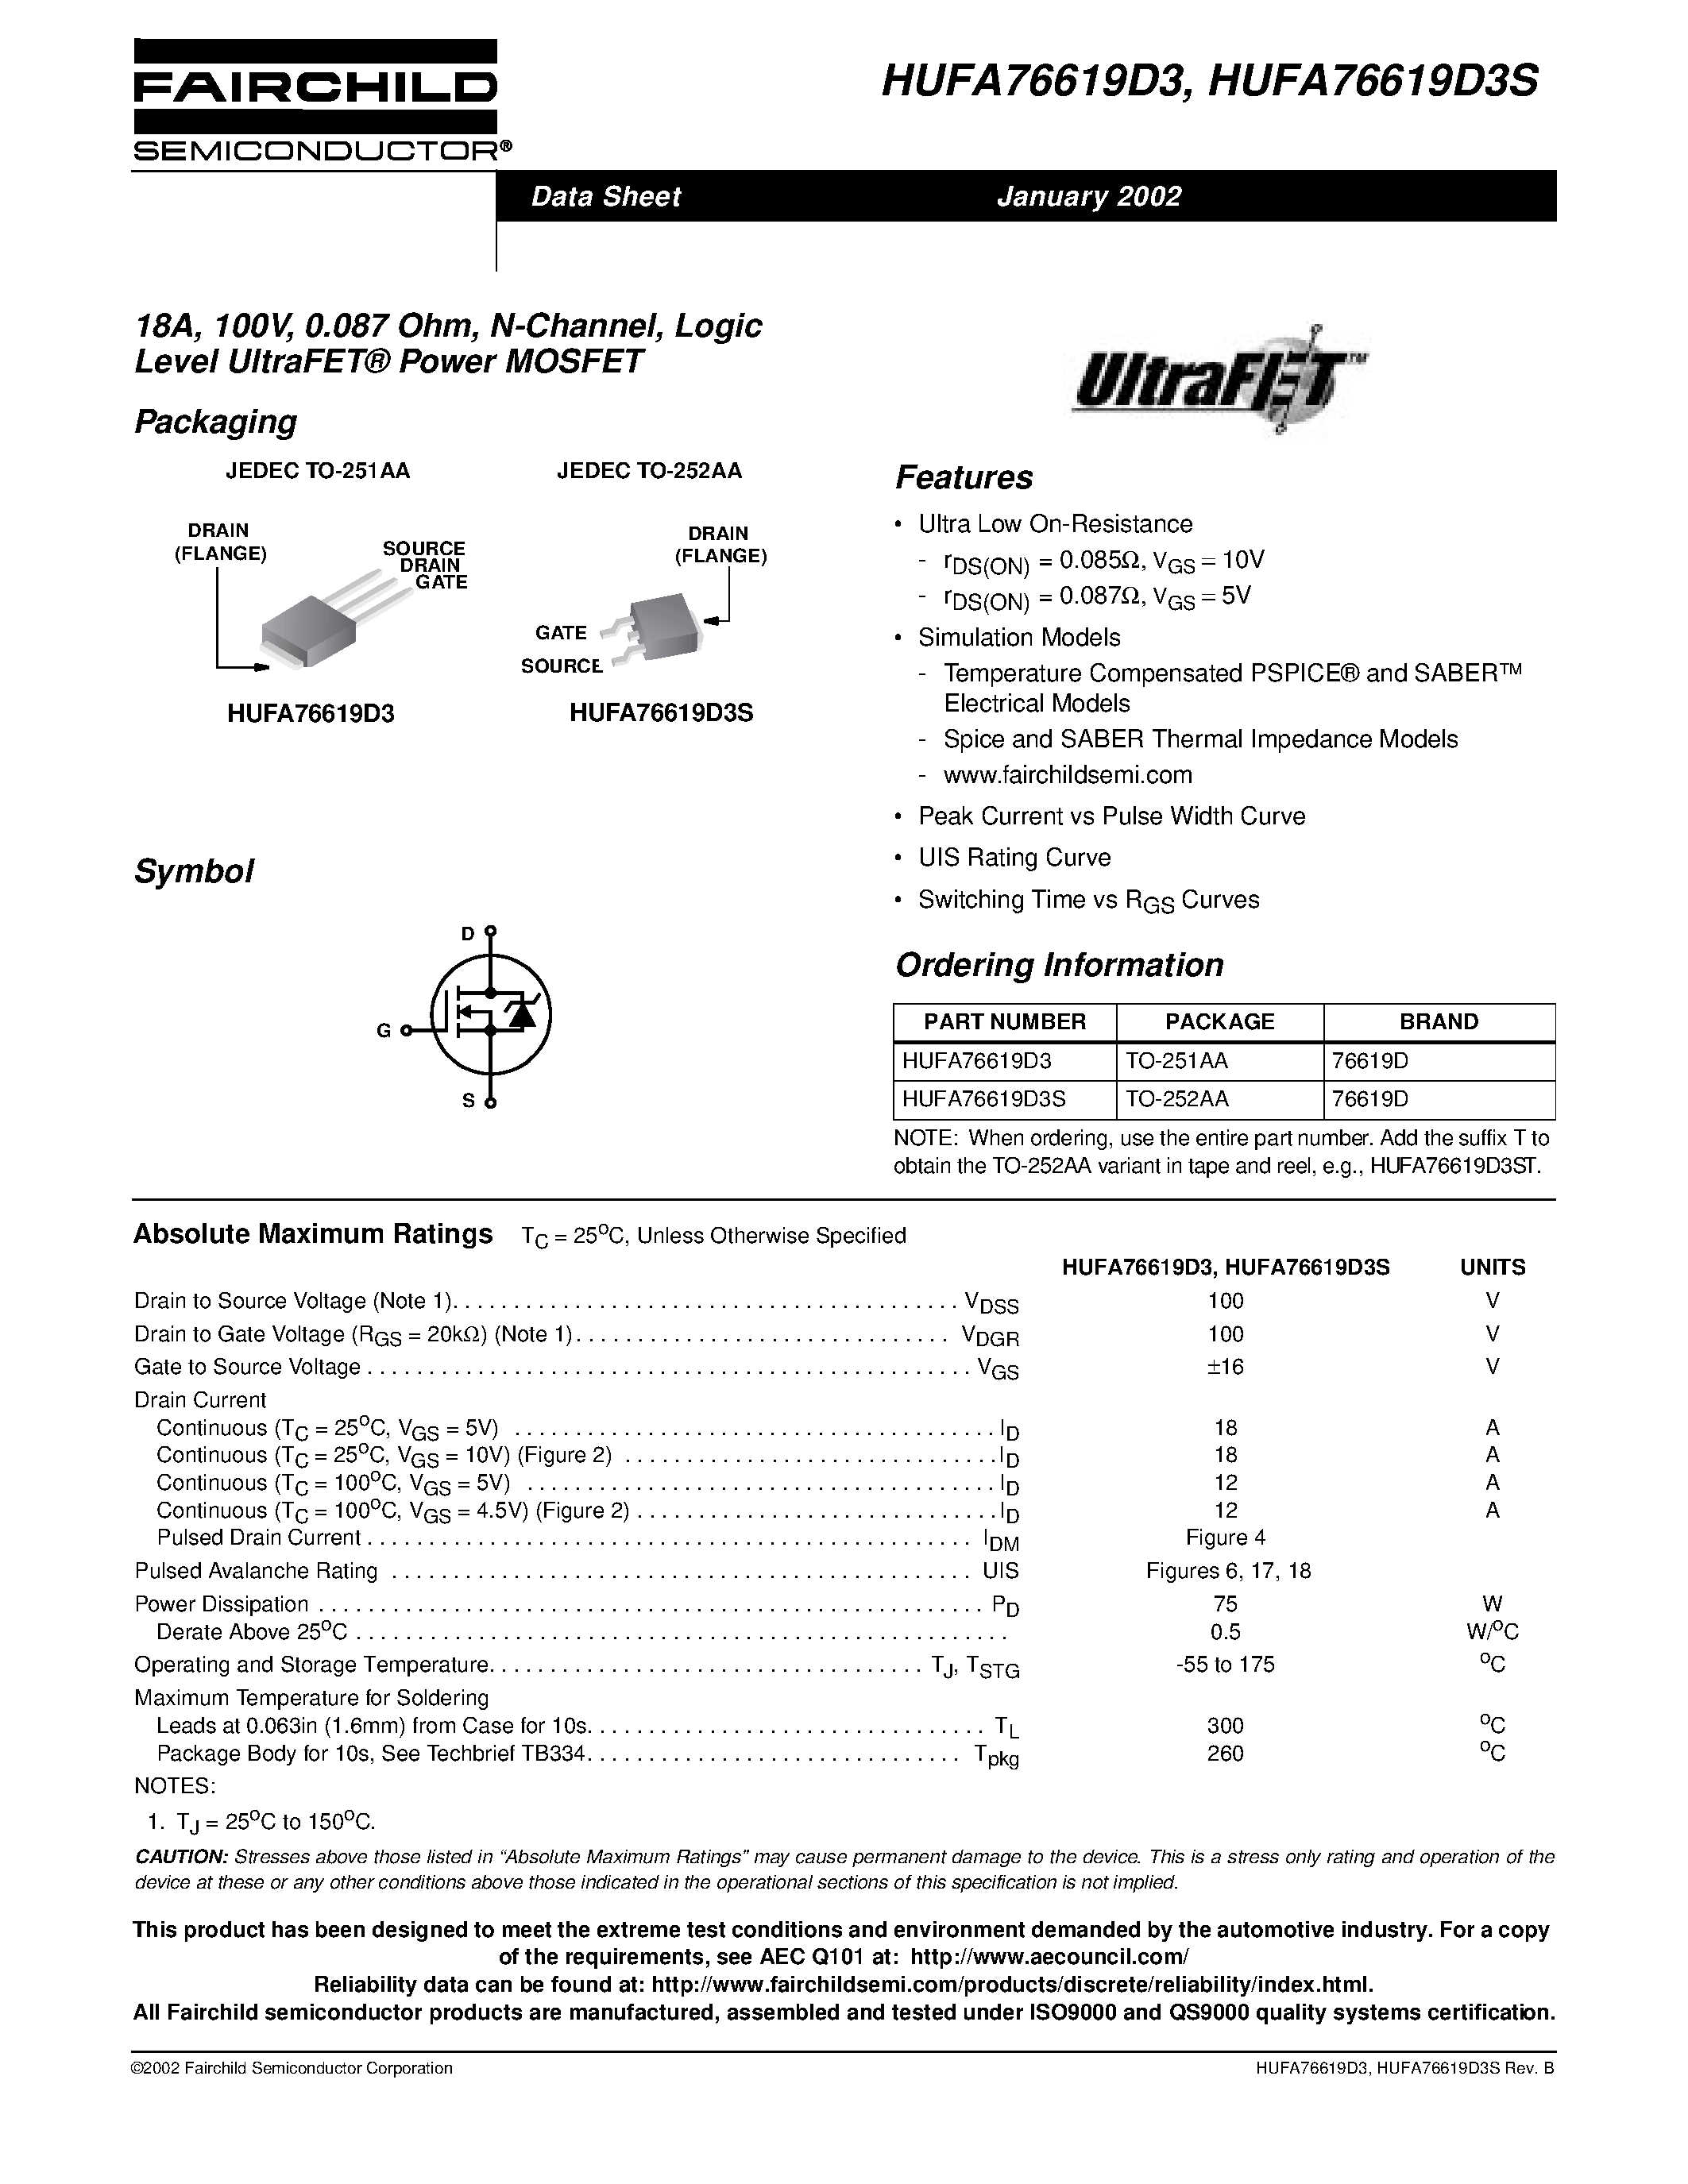 Datasheet HUFA76619D3S - 18A/ 100V/ 0.087 Ohm/ N-Channel/ Logic Level UltraFET Power MOSFET page 1